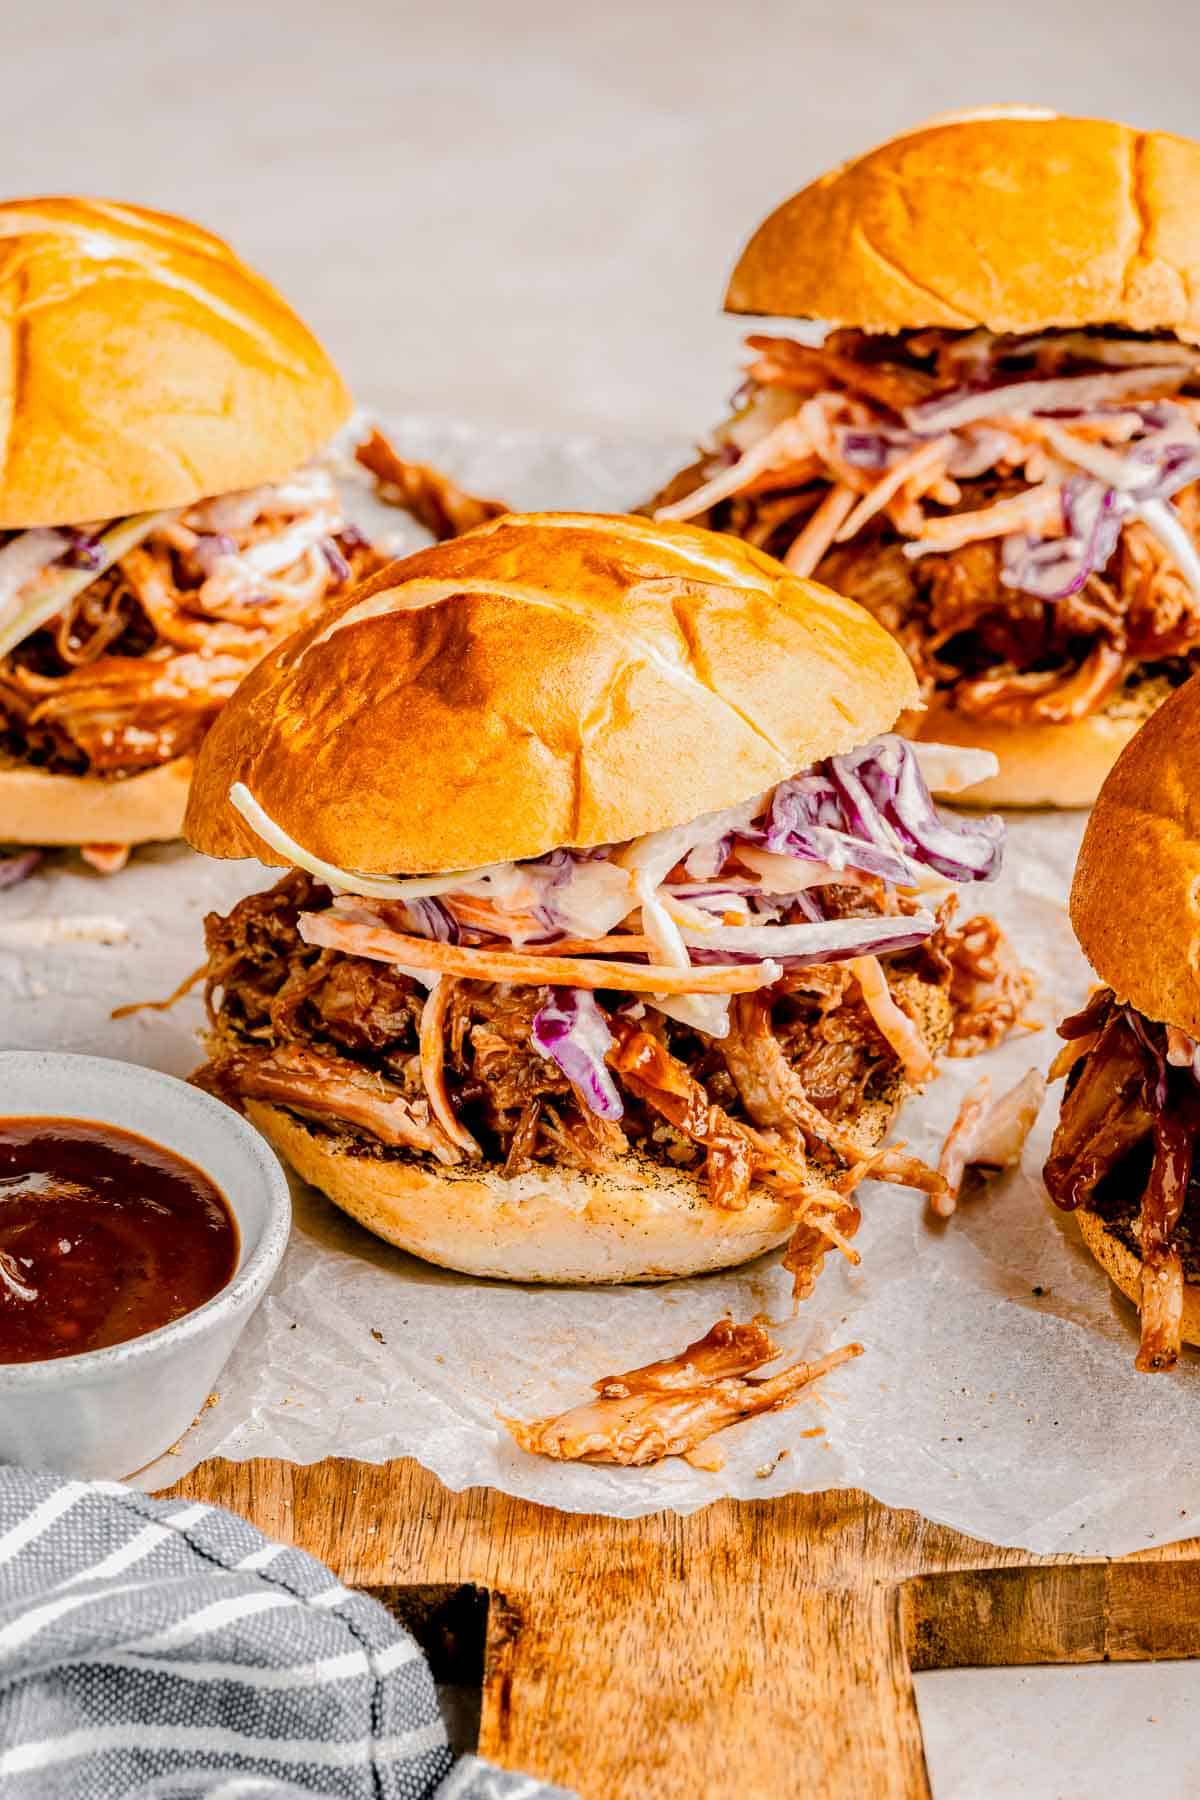 BBQ pulled pork sliders with a side of BBQ sauce.